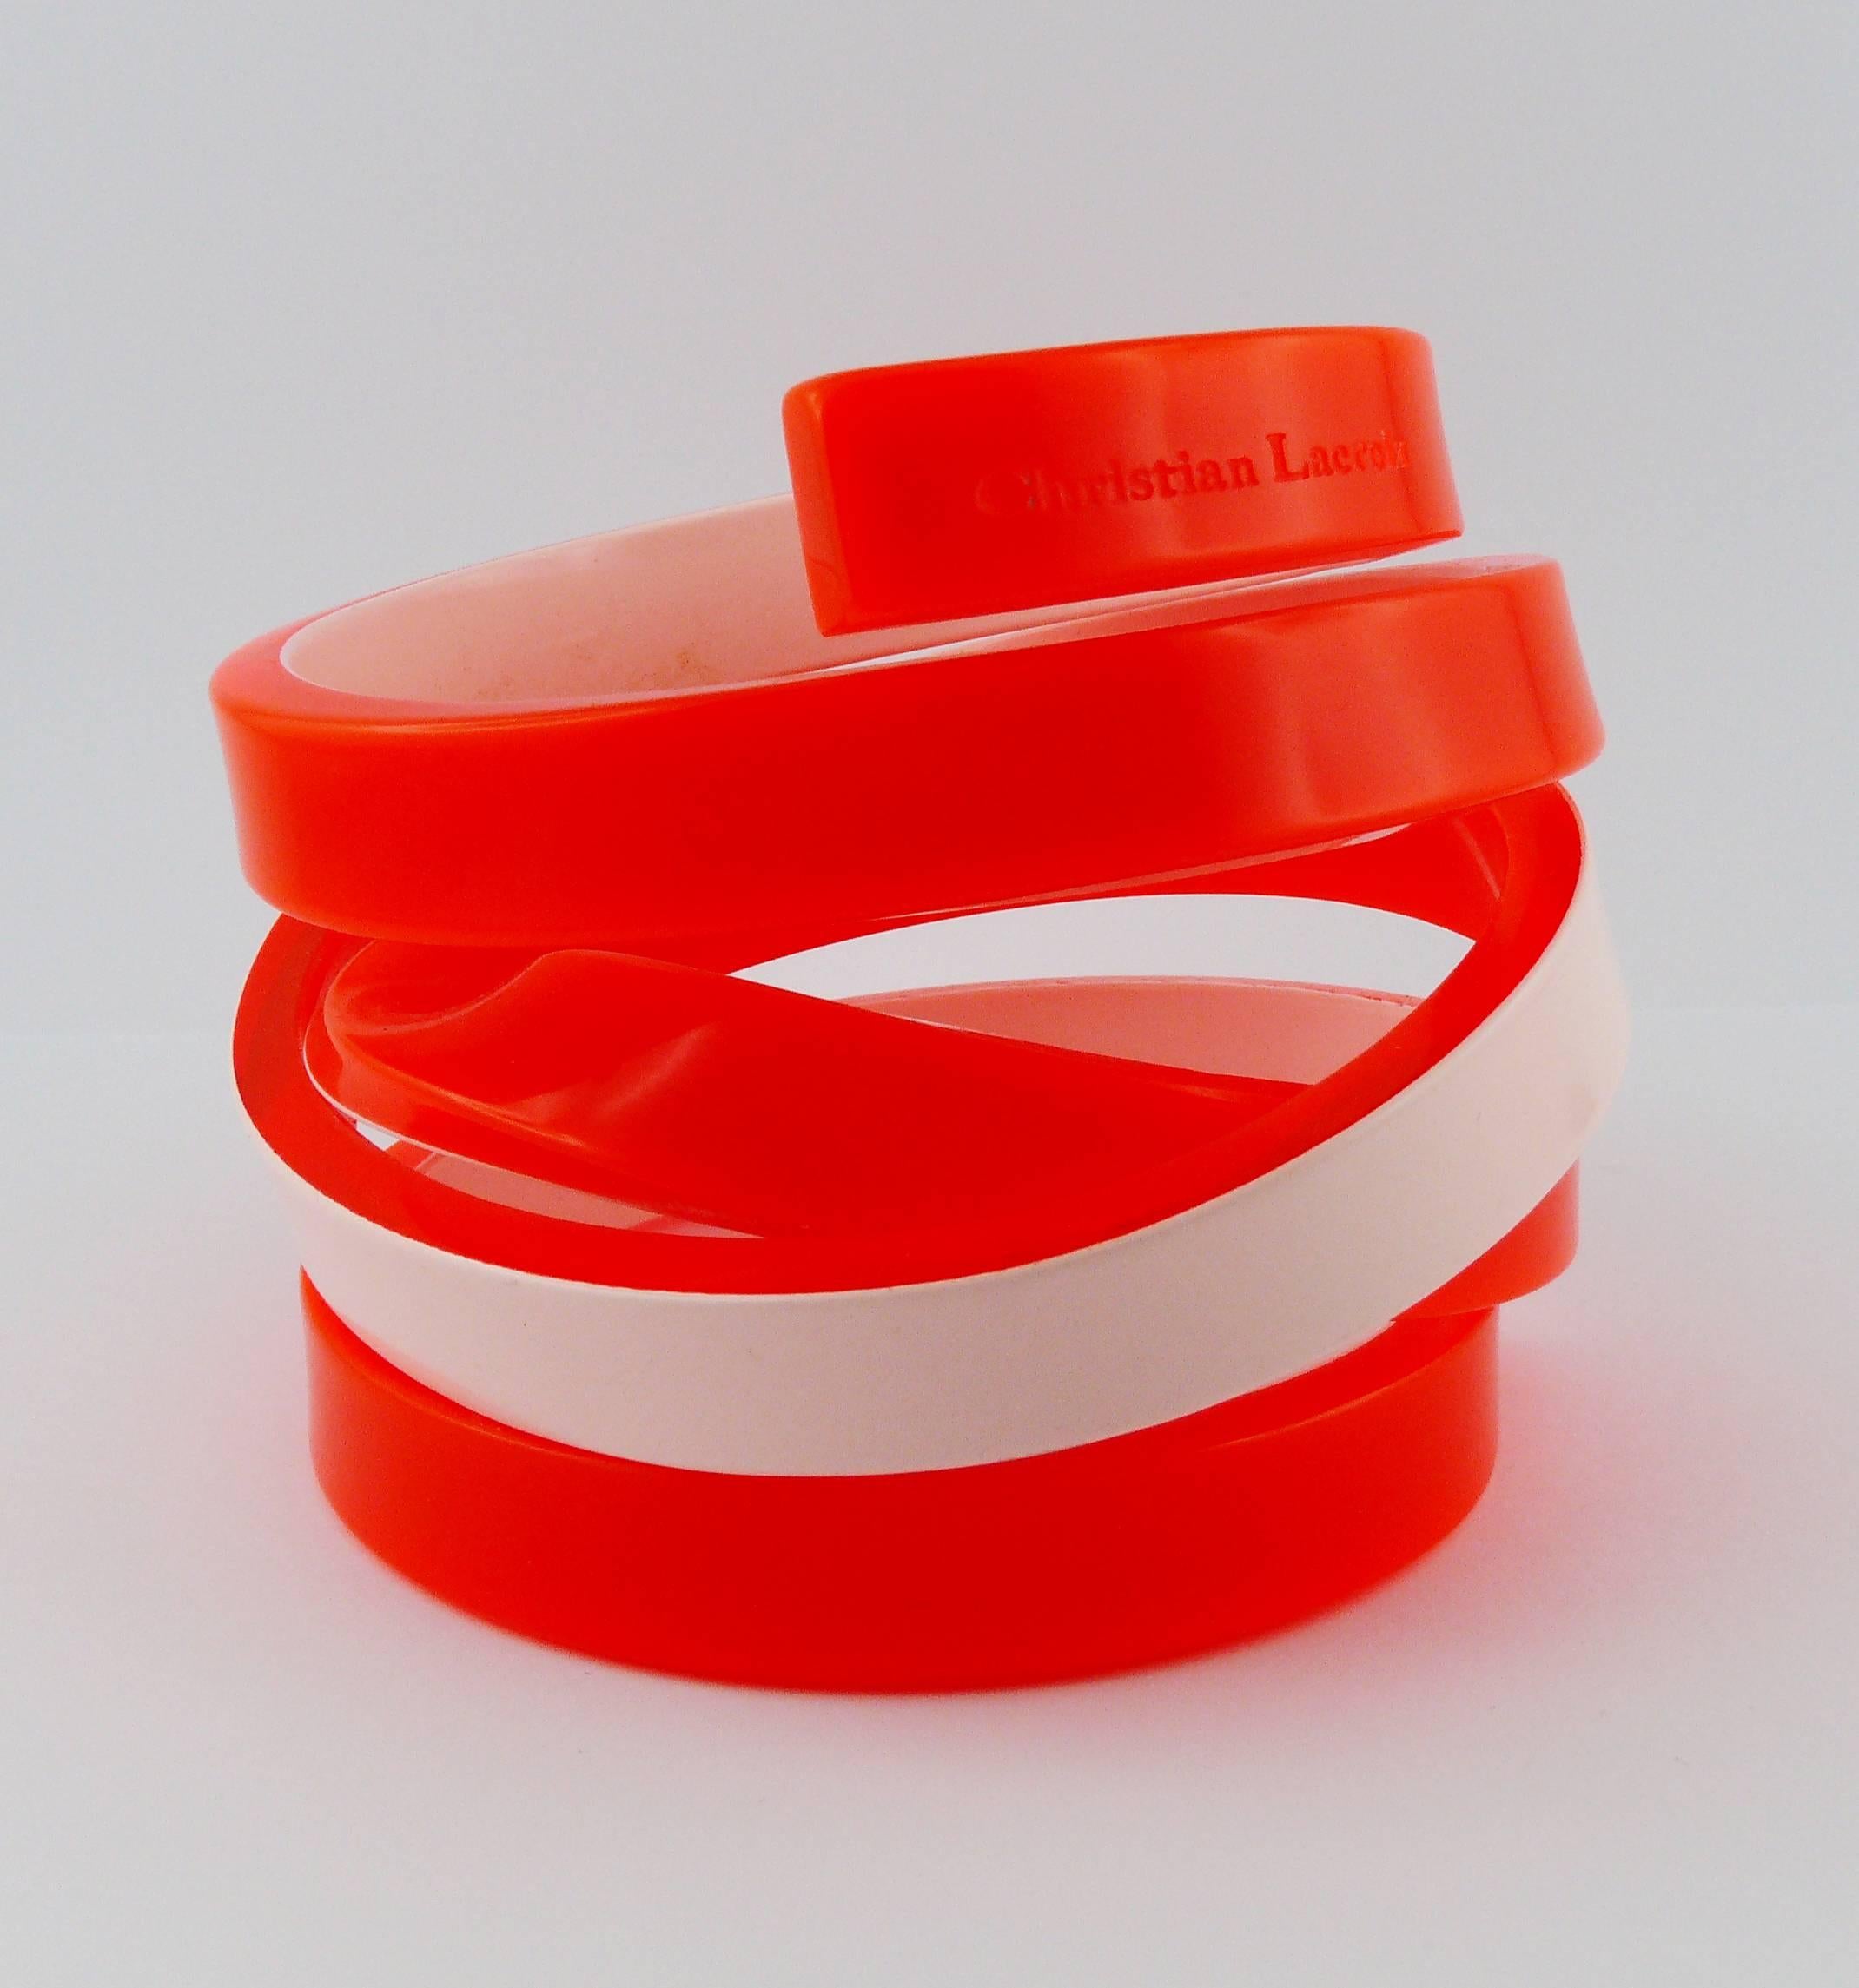 CHRISTIAN LACROIX neon orange resin sculptural cuff bracelet.

Runway model - Spring 2008 Ready-to-Wear Runway show.

Embossed CHRISTIAN LACROIX and Made in France.

Indicative measurements : max. height approx. 8 cm (3.15 inches).

JEWELRY